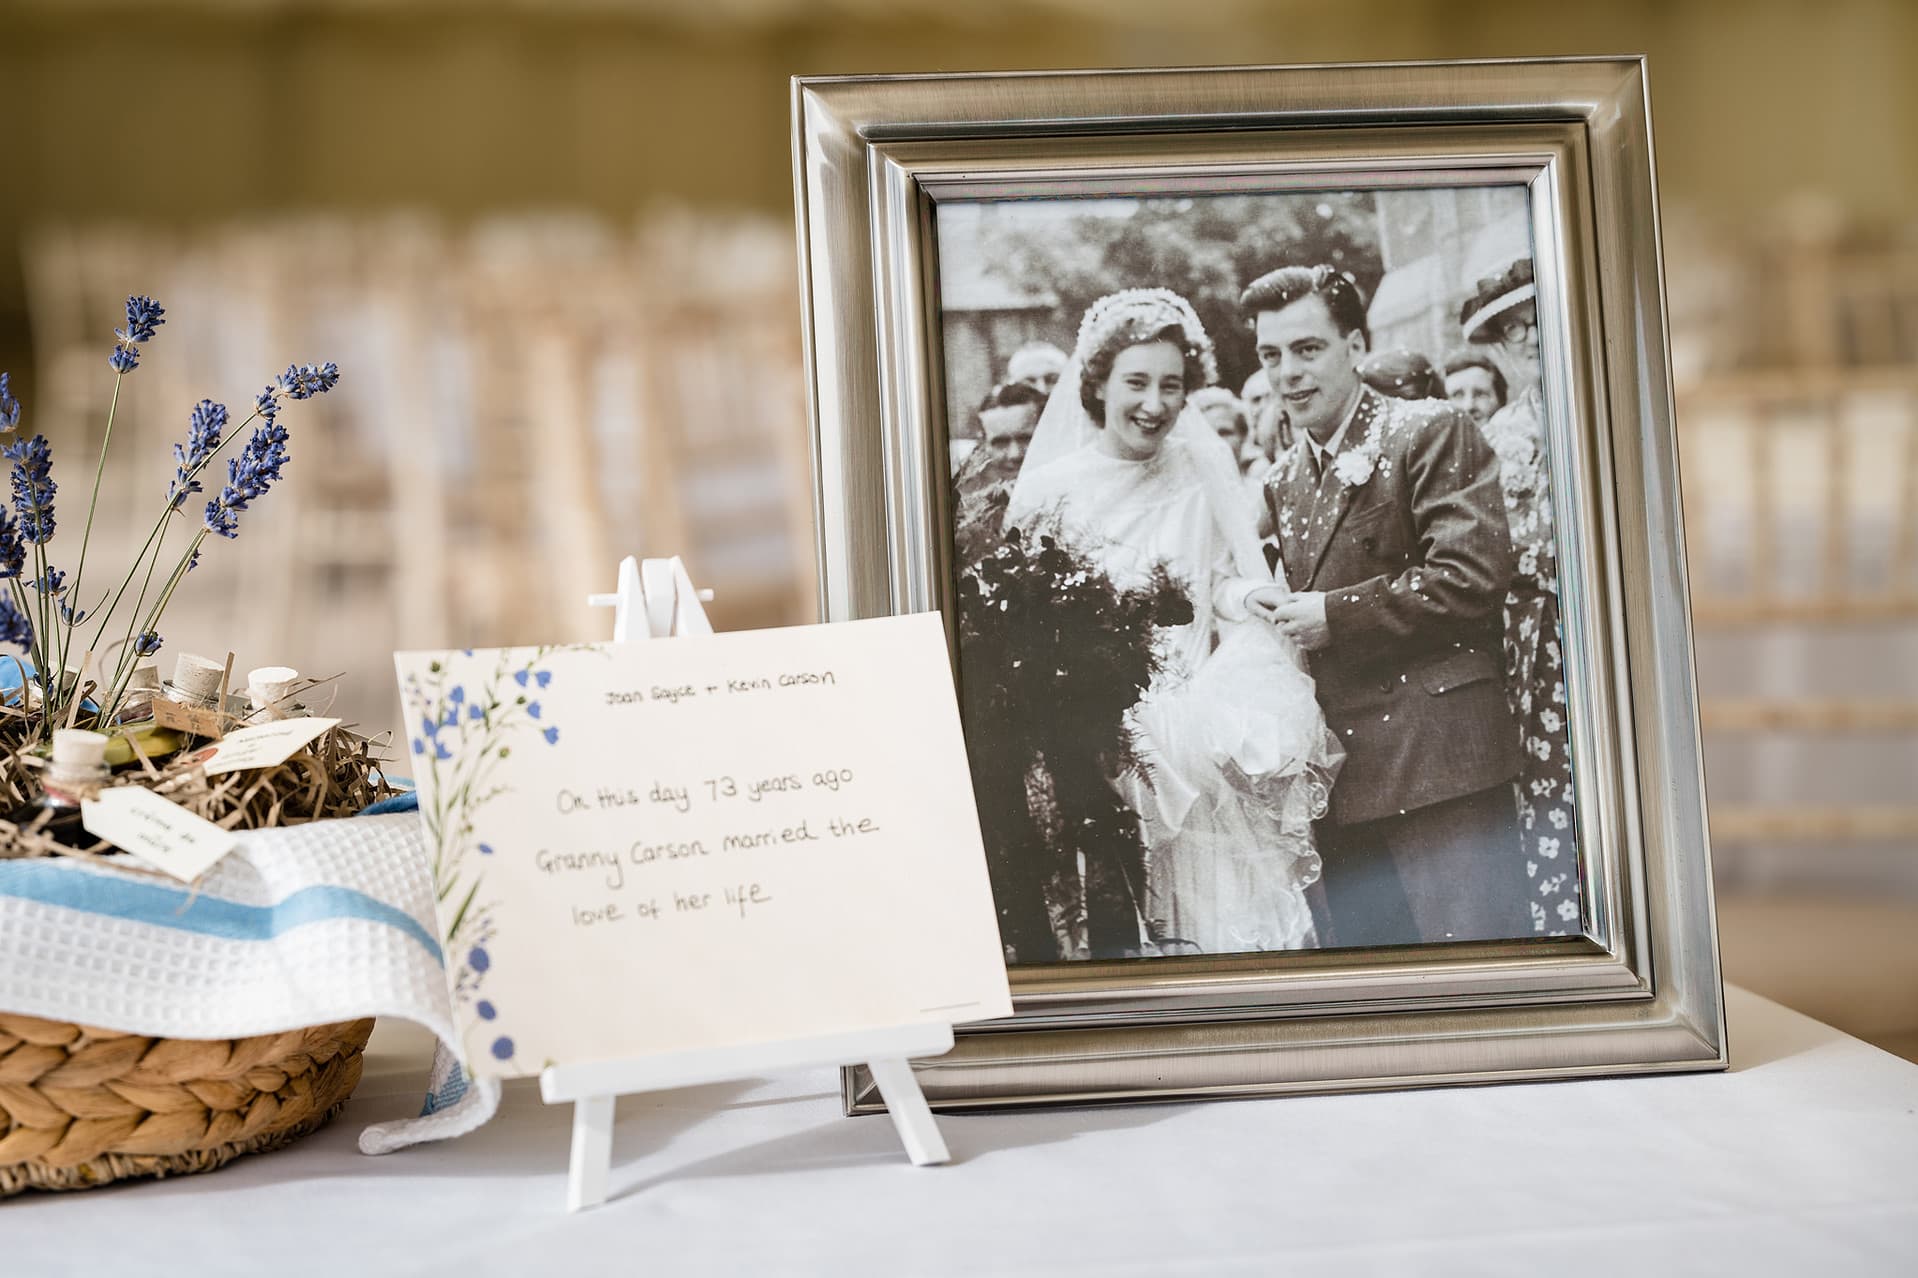 Black and white framed photo of the bride's grandparents and a sign that says they married on the same date